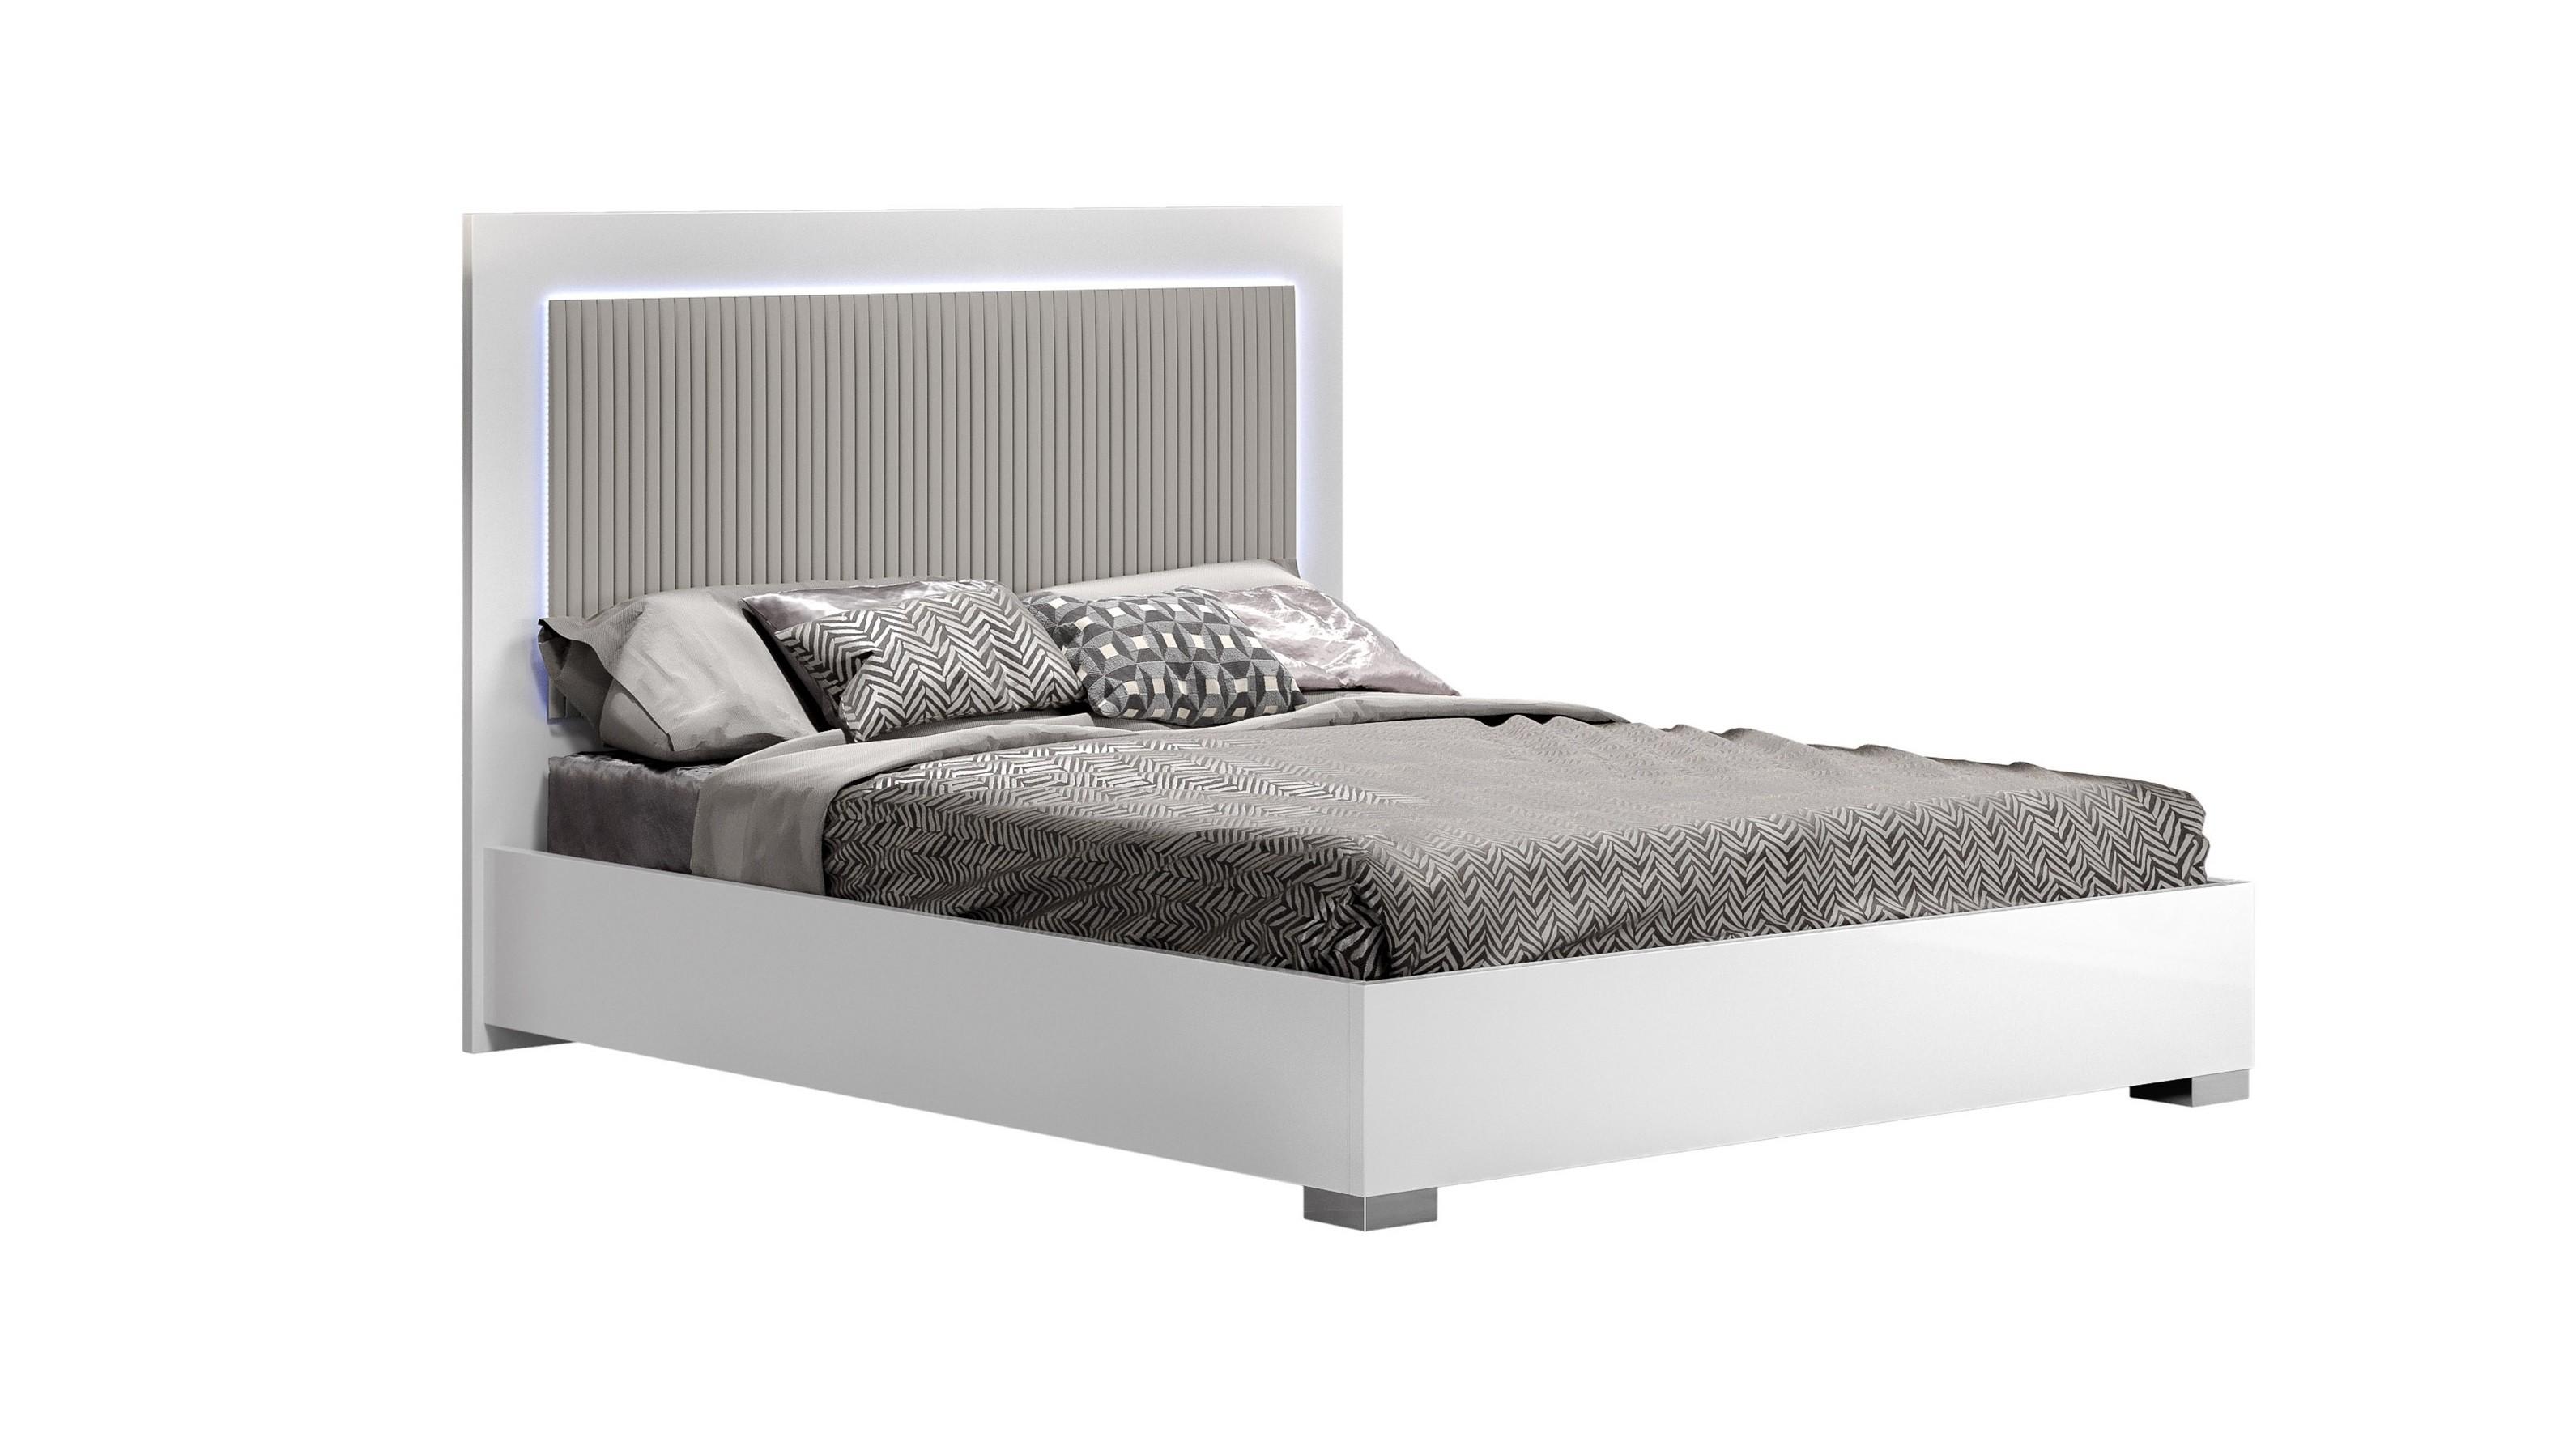 

    
Premium King Size Bed in White w/ LED light MADE IN ITALY J&M Luxuria
